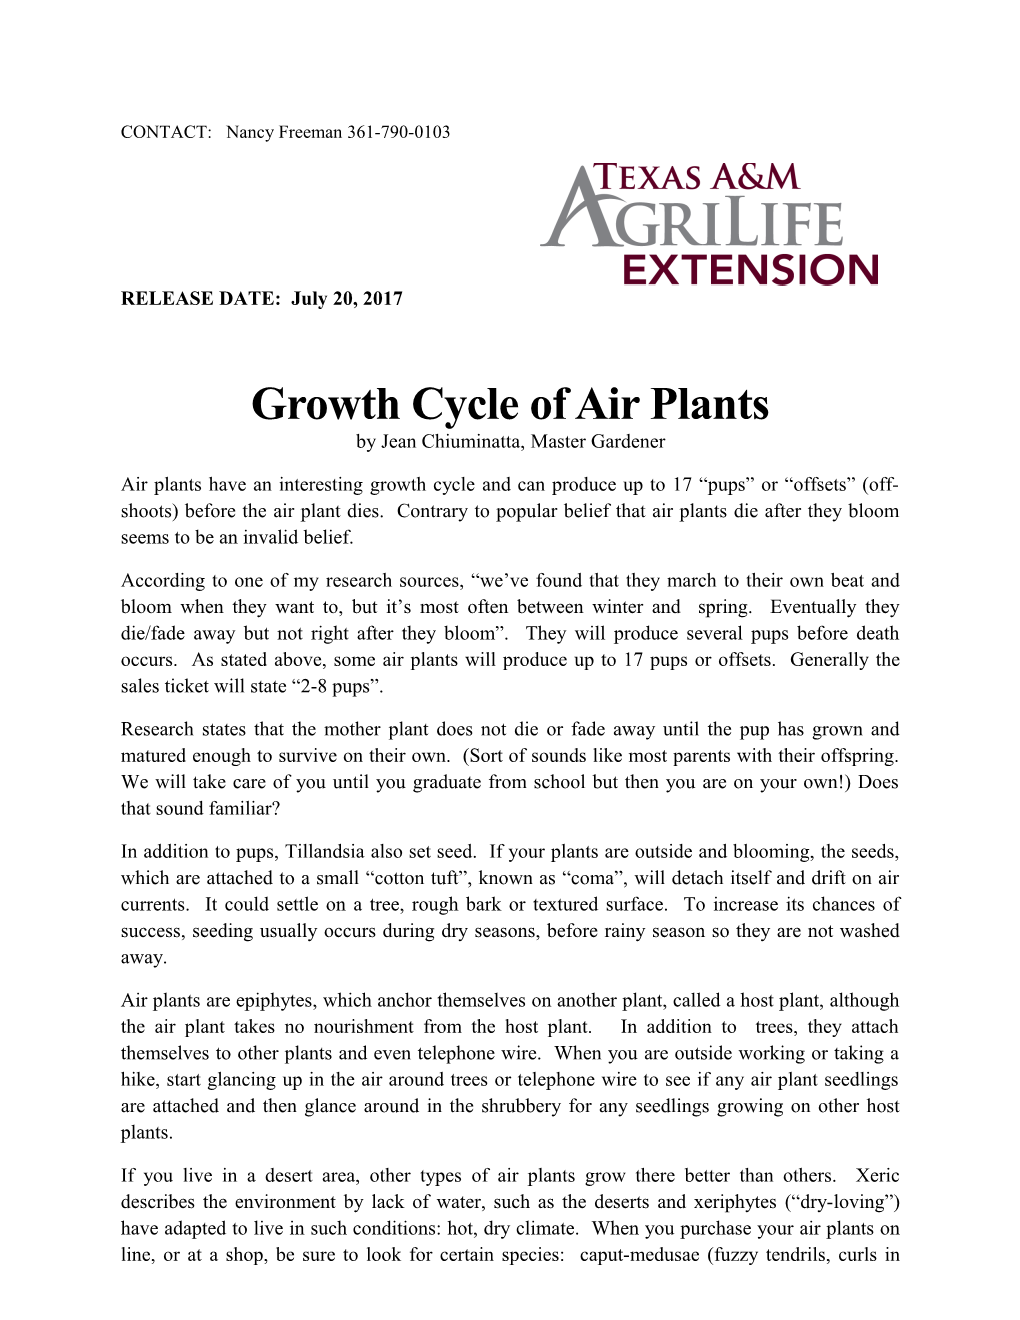 Growth Cycle of Air Plants